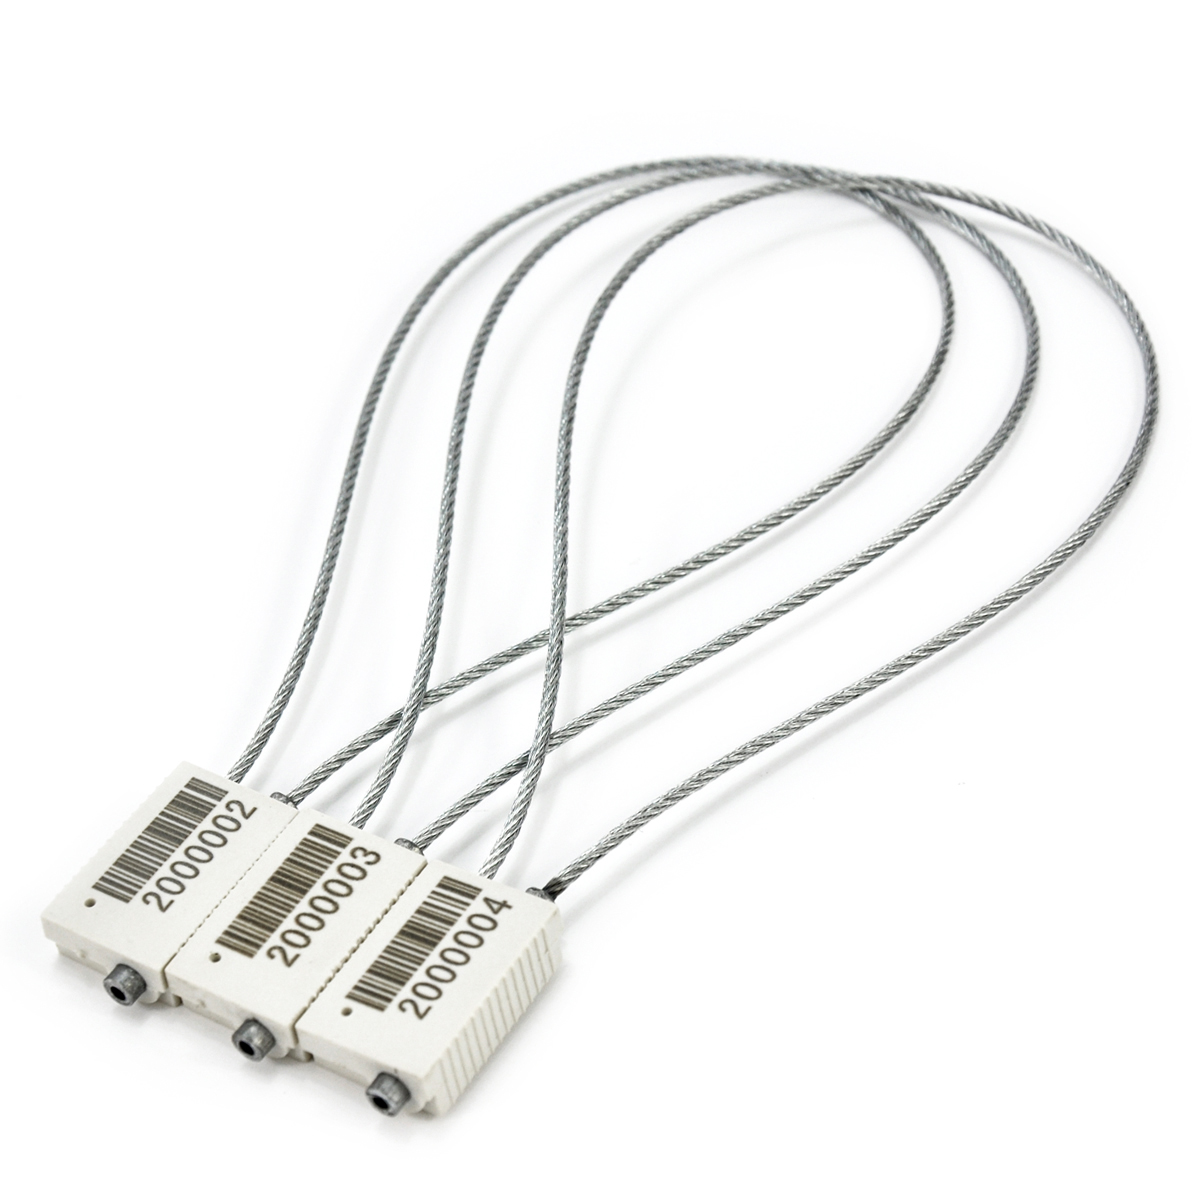 SL-16H metal ABS cable sellos